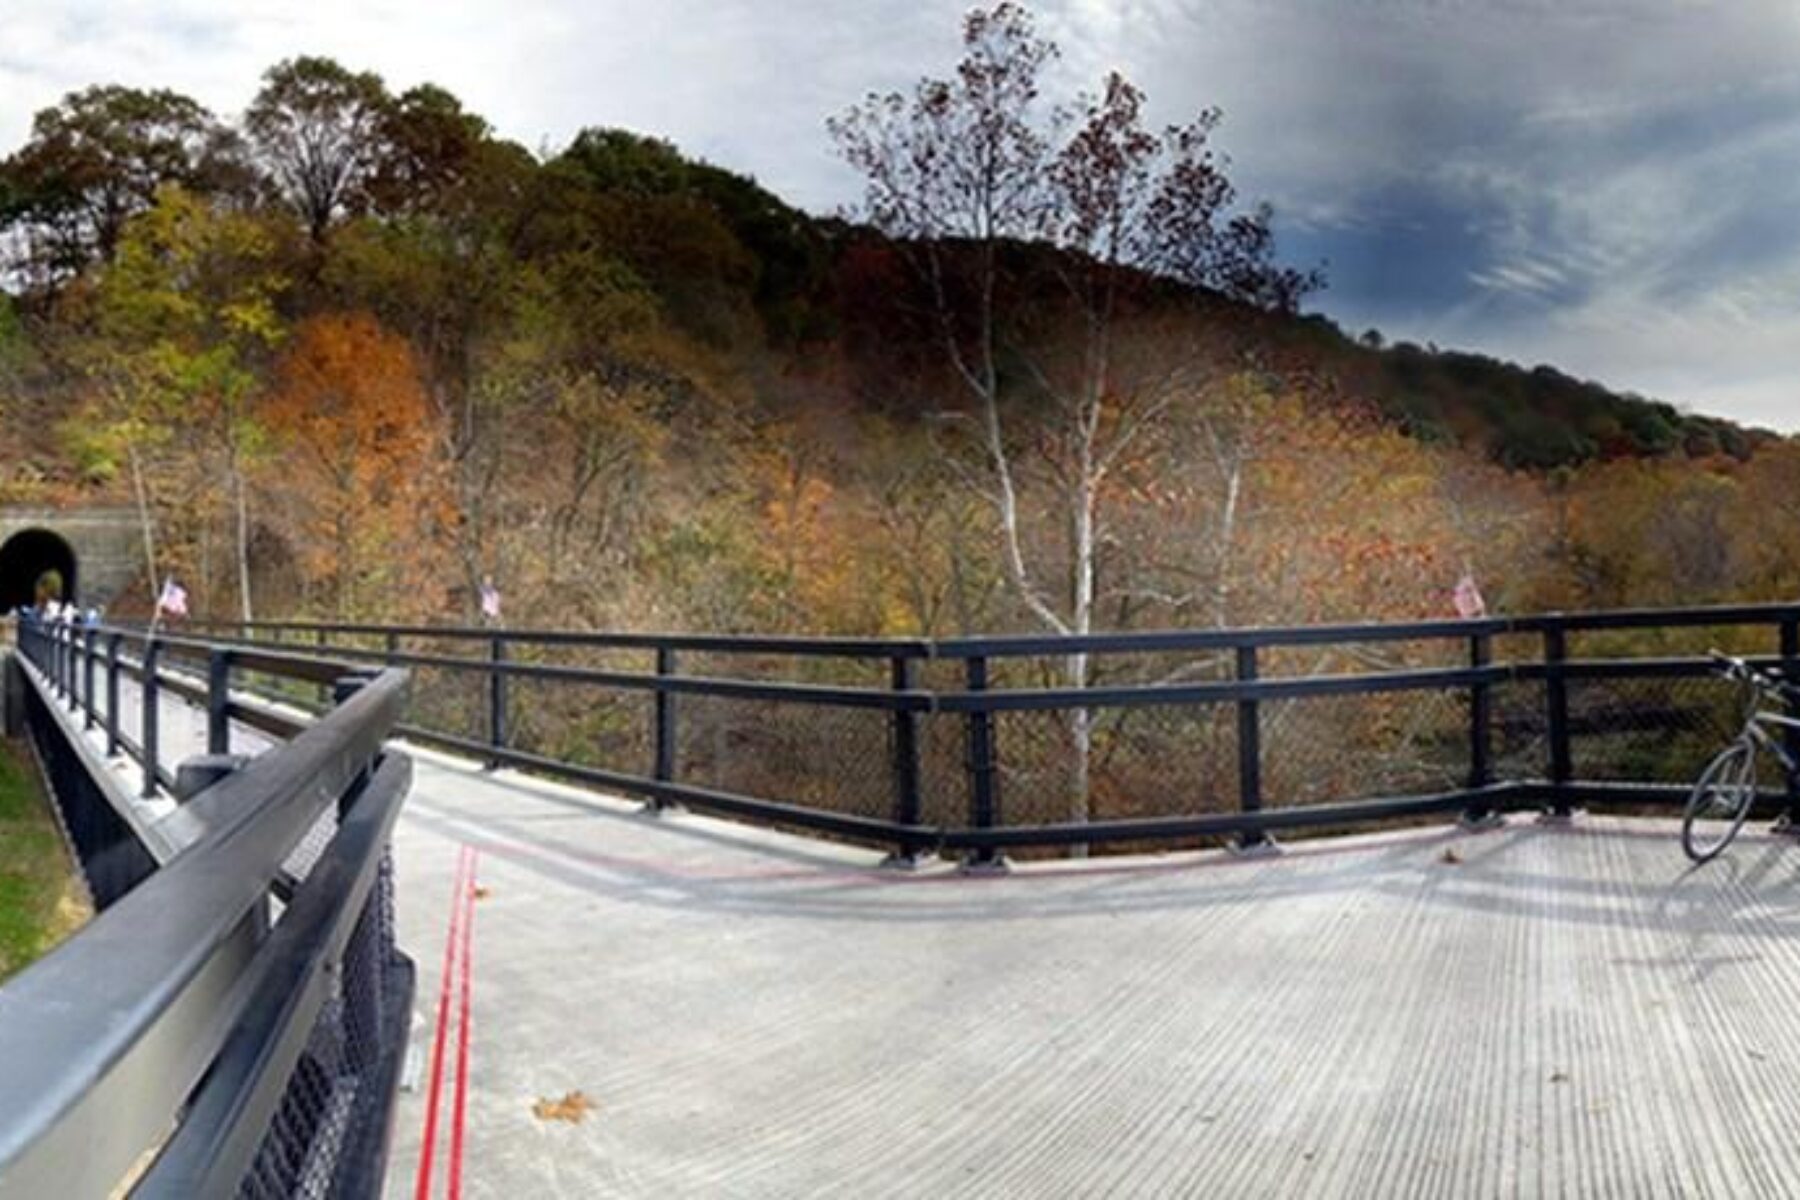 Midway across the span of the Chartiers Creek Bridge | Photo courtesy Kordite | CC by 2.0